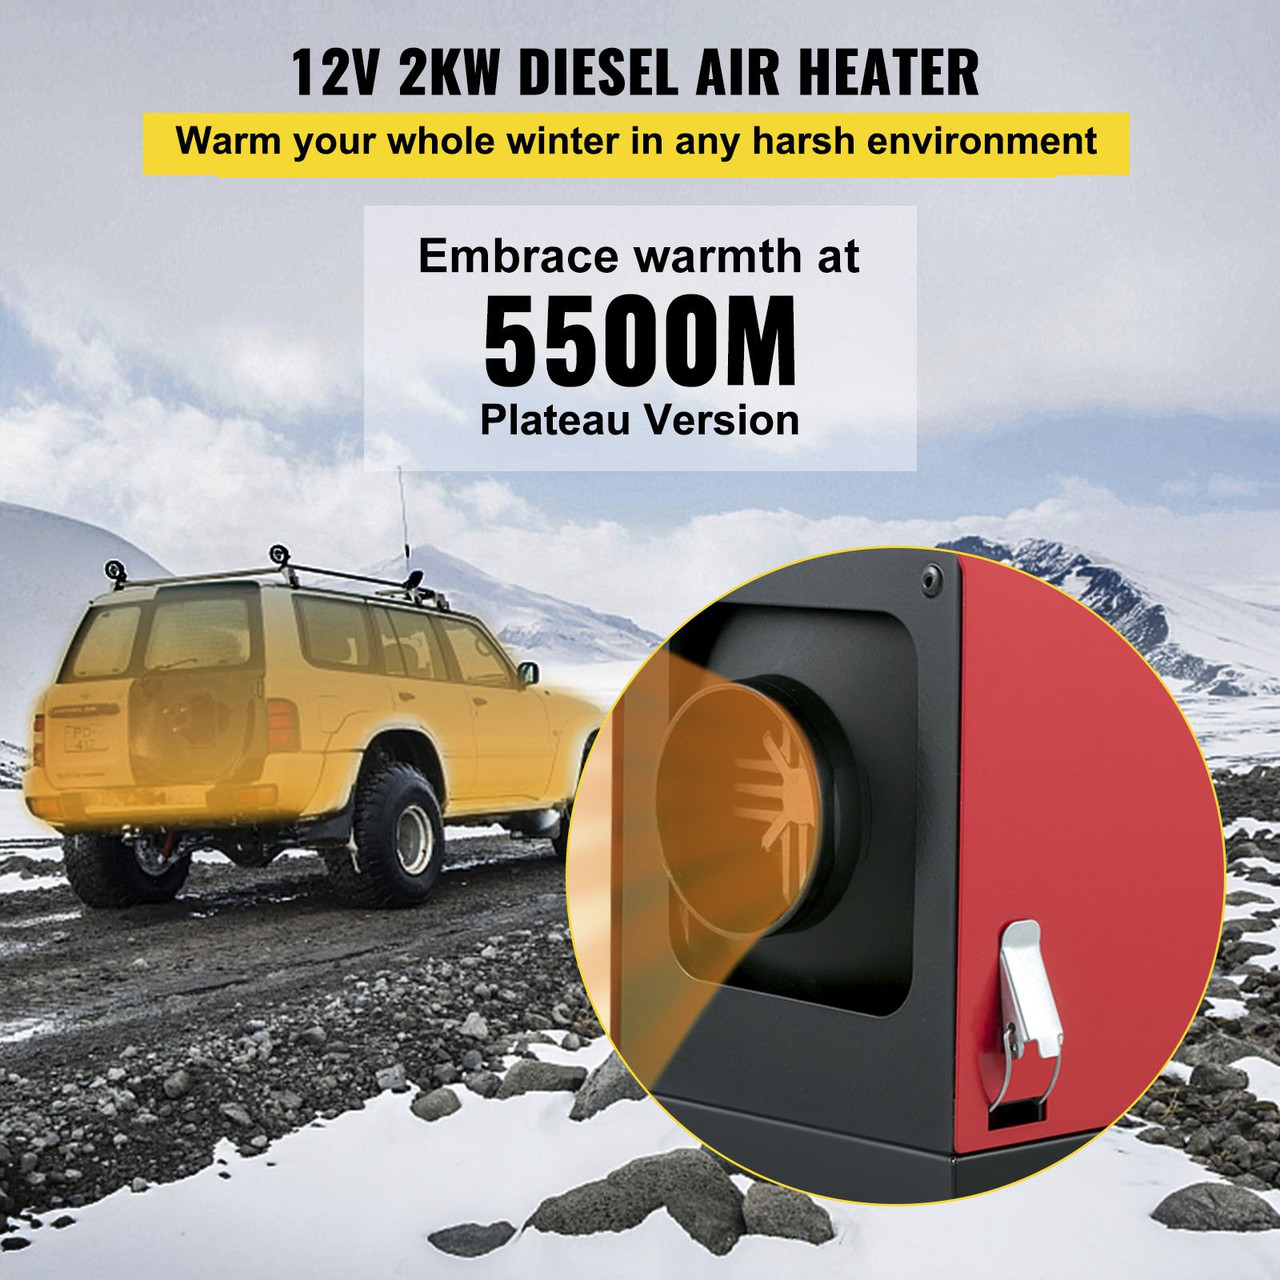 Diesel Air Heater All in One 12V 2KW Plateau Version For Car Trucks Boats Bus RV